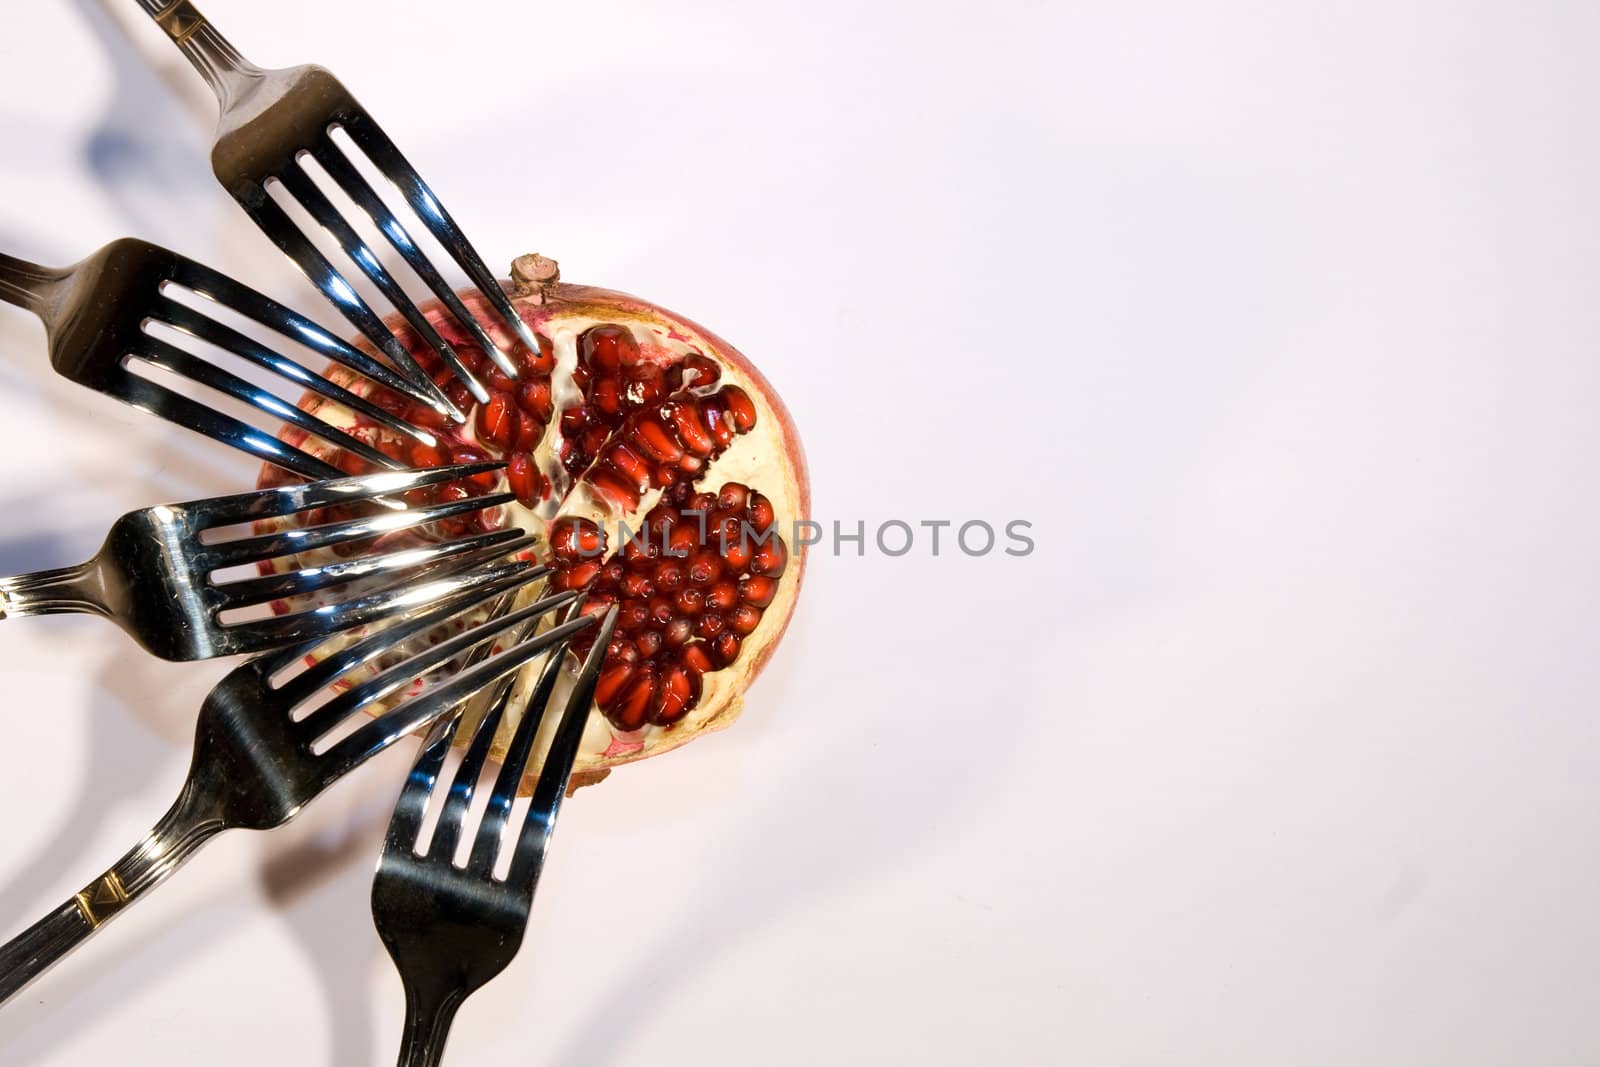 Red pomegranate with metal plugs in a white environment